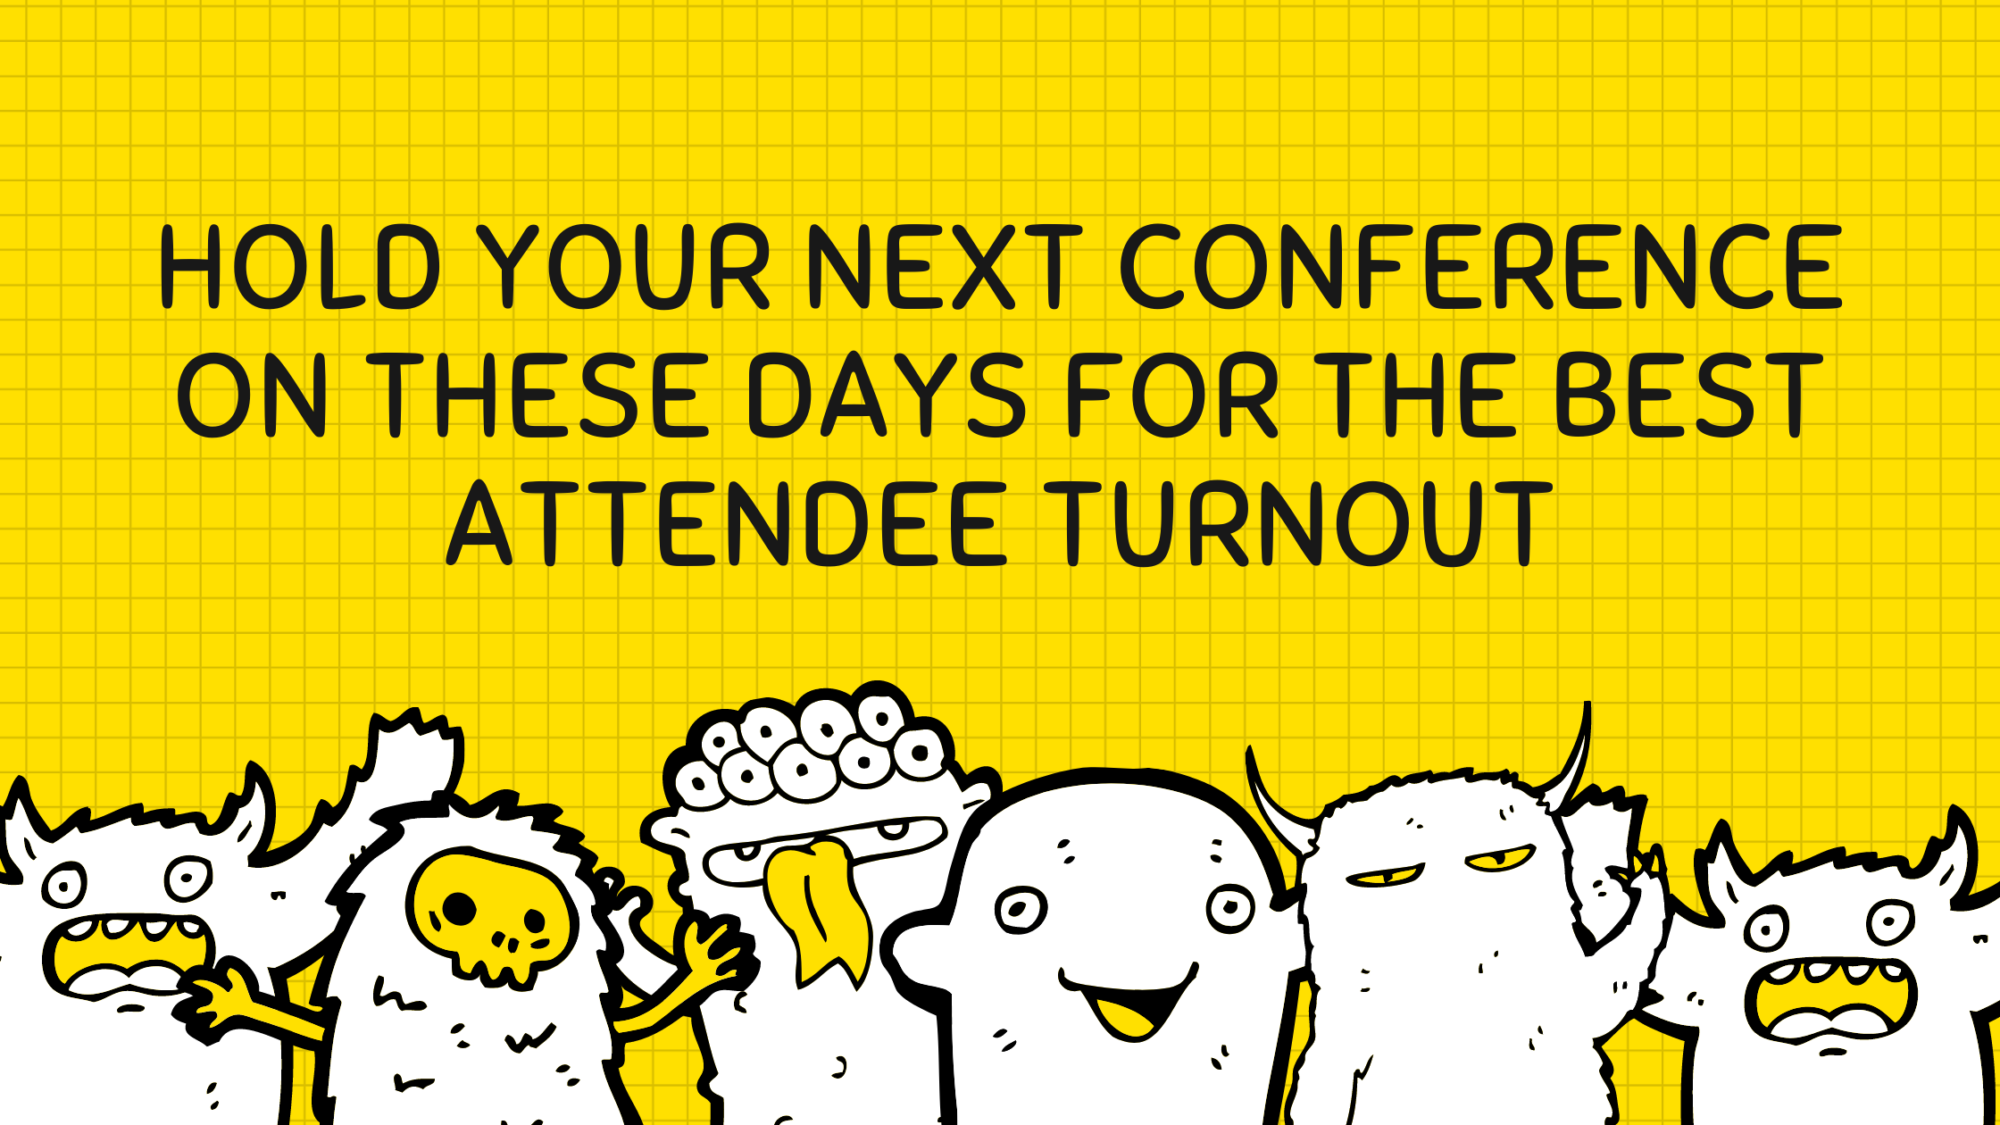 Hold Your Next Conference On These Days For The Best Attendee Turnout